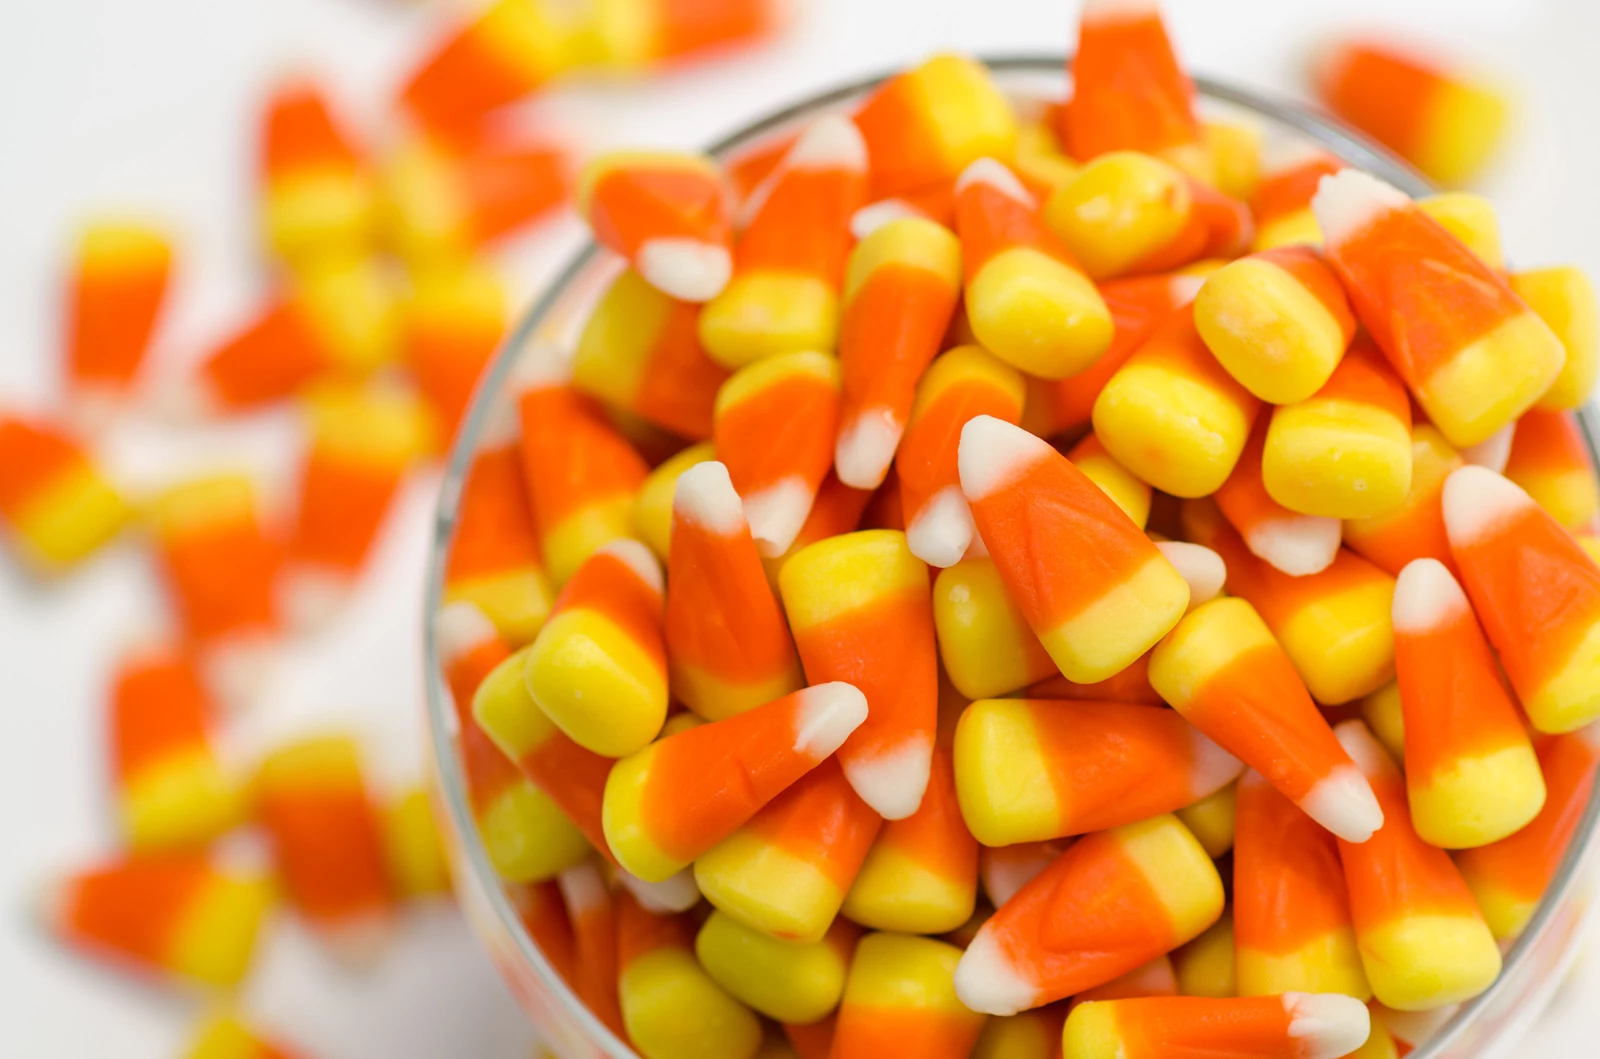 Illinois and Wisconsin Residents Agree, This Candy is the Worst